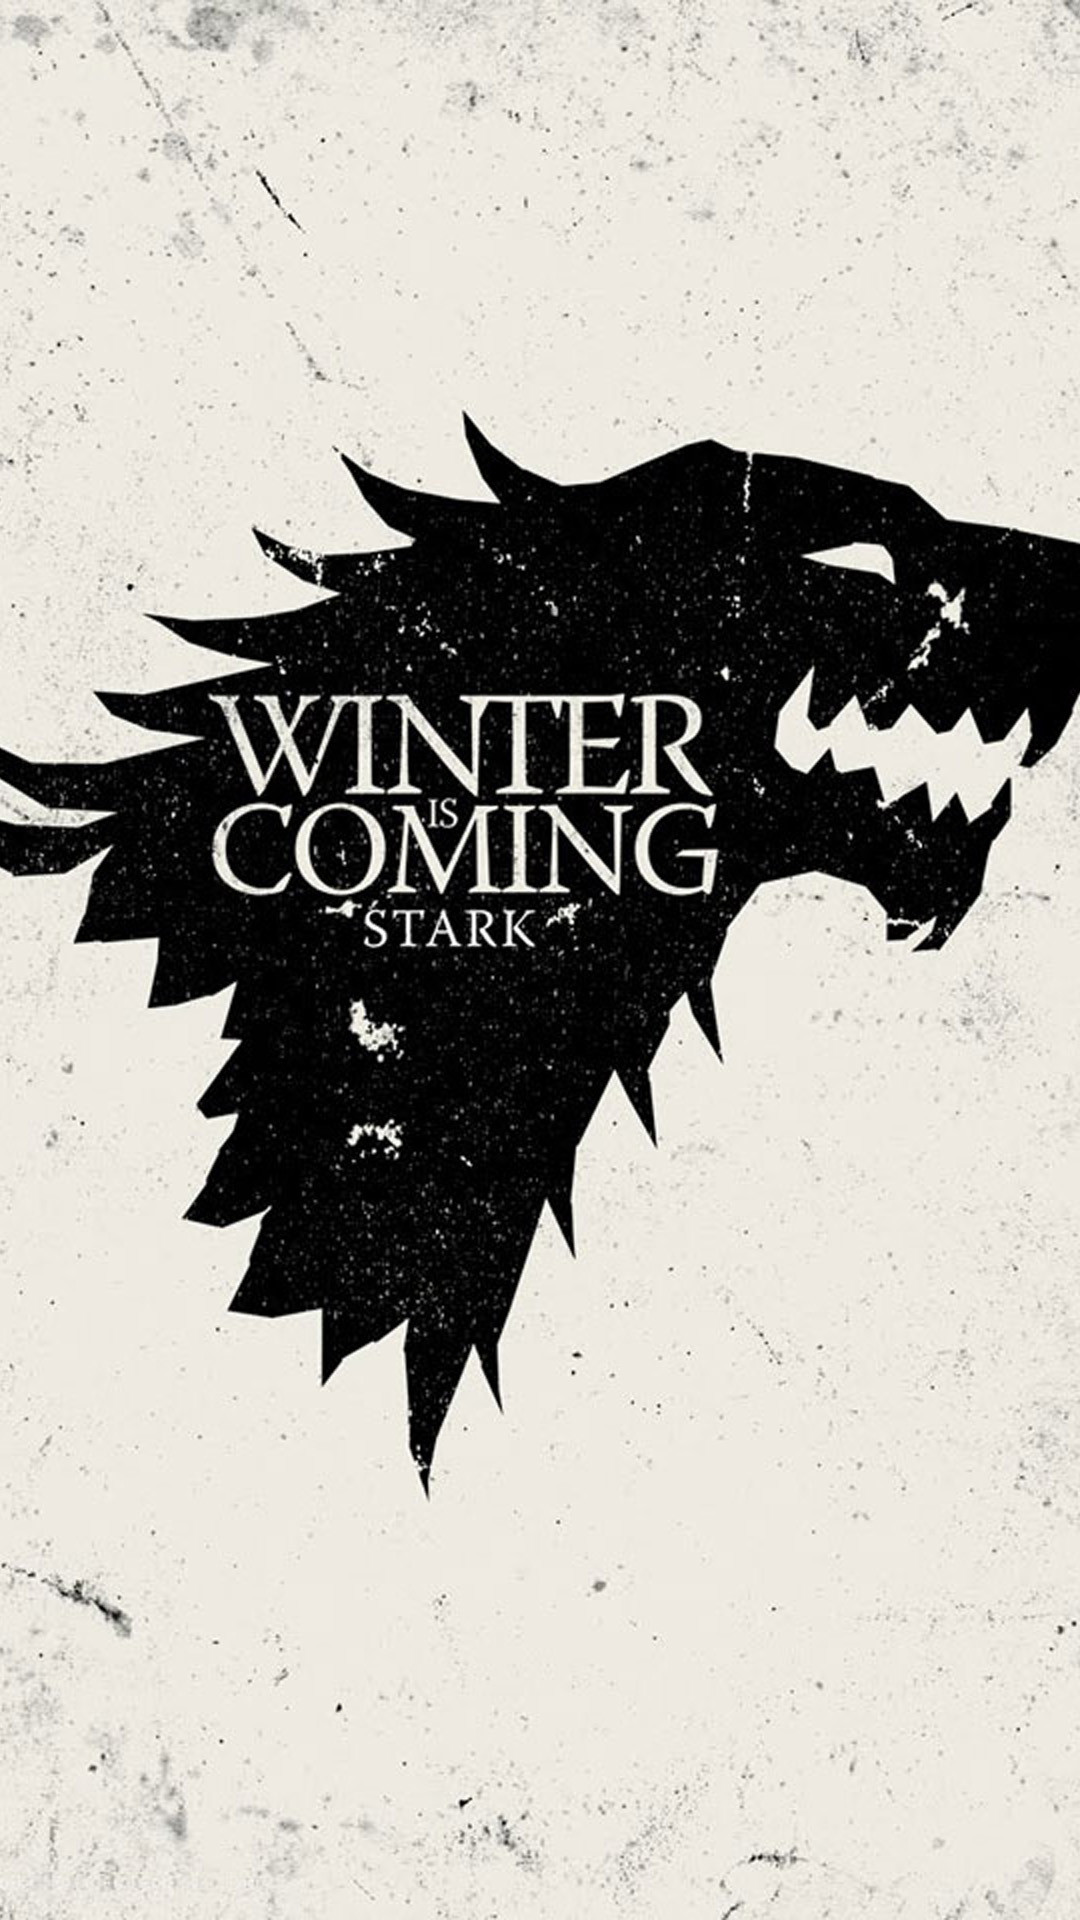 1080x1920 Winter is Coming HD Wallpaper iPhone 6 plus